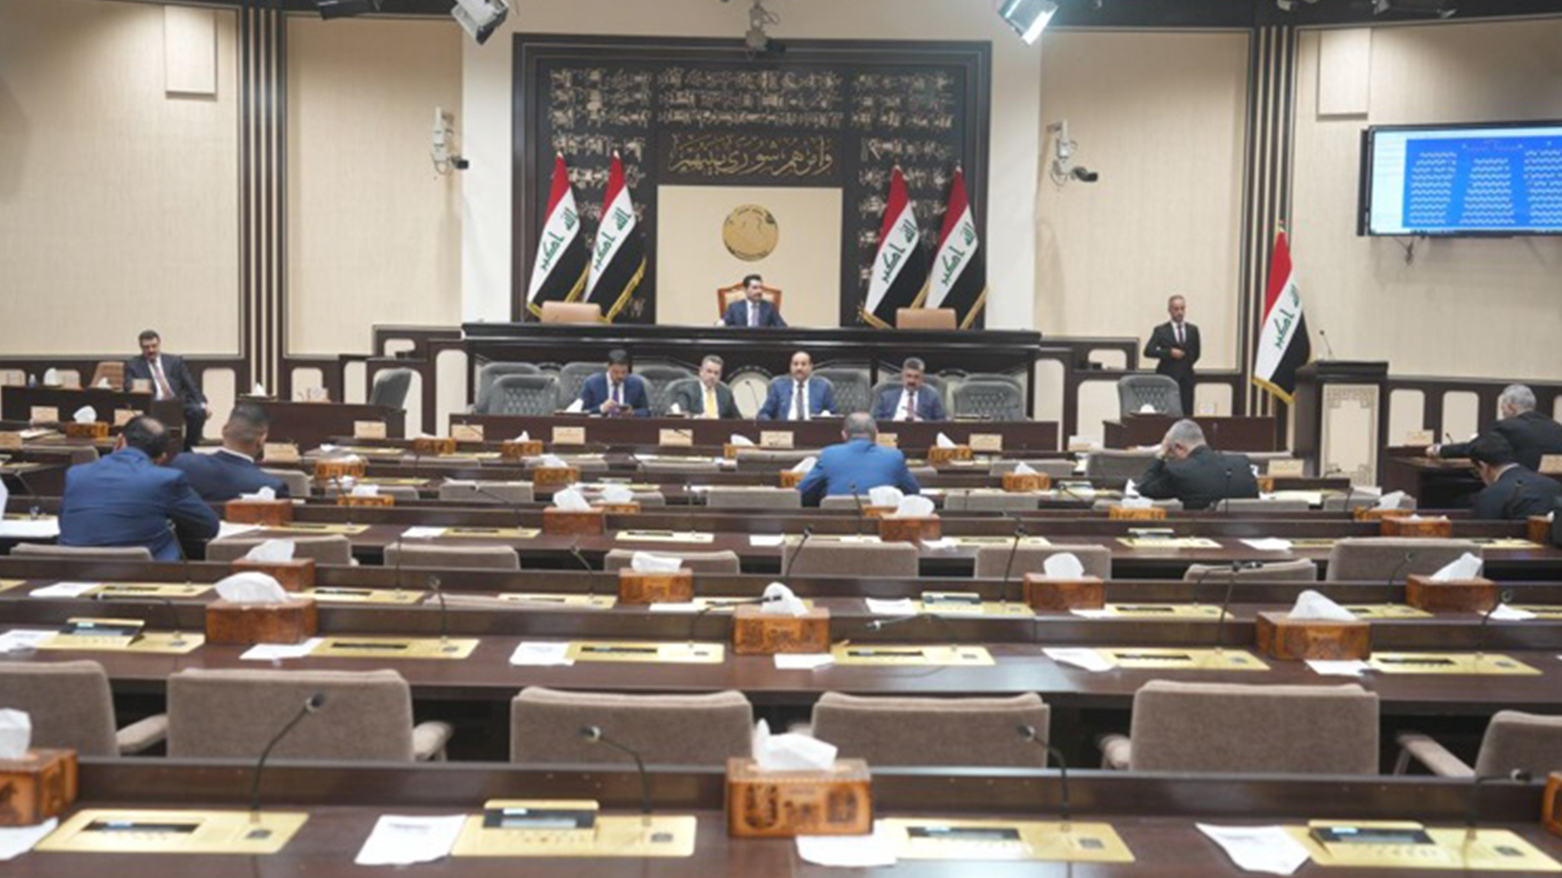 Meeting of the Iraqi Council of Representatives. (Photo: Iraqi Council of Representatives)